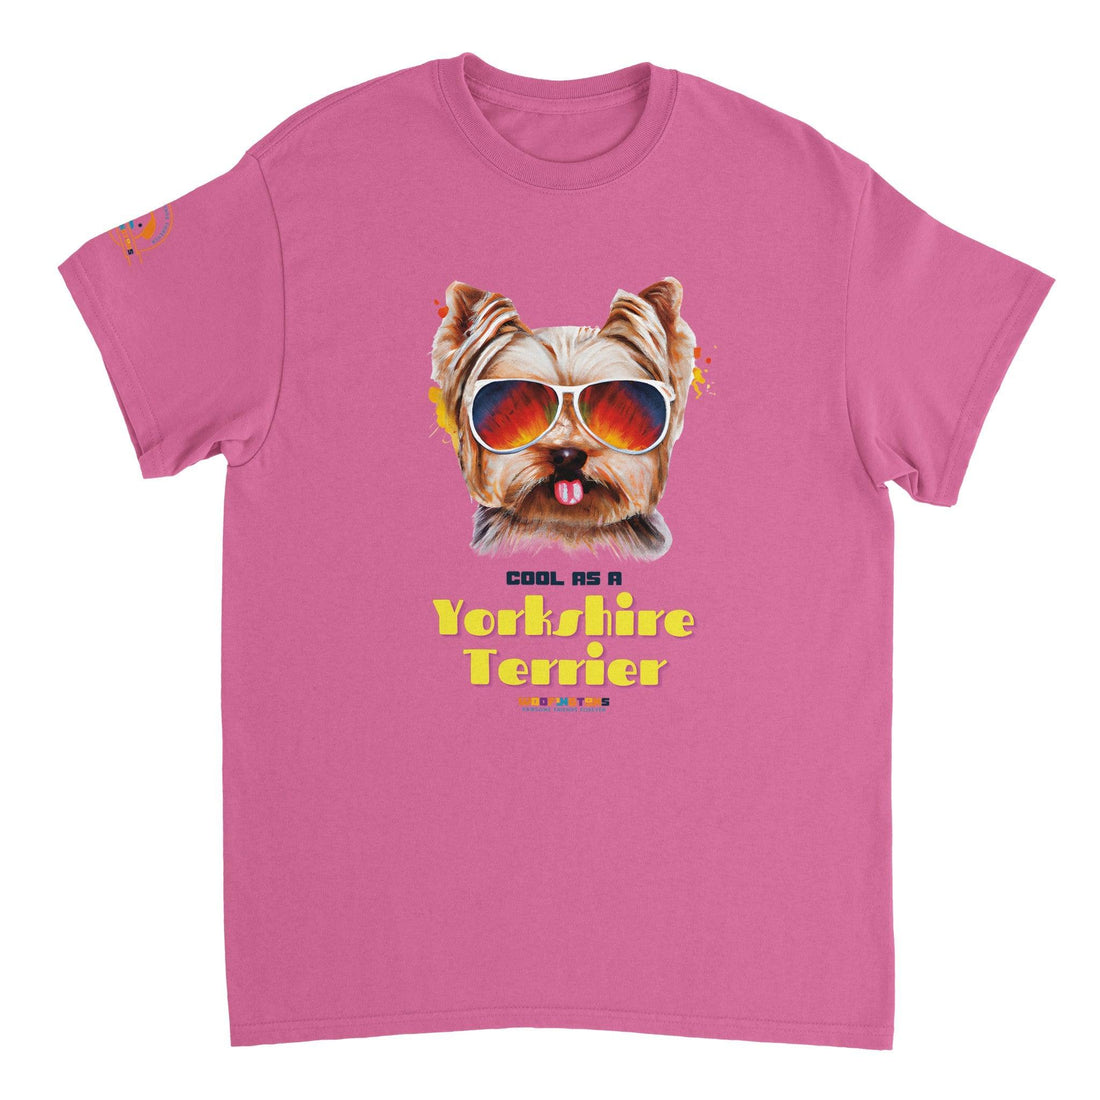 &quot;Cool as a Yorkshire Terrier” - Cool Dog T-Shirt - Woofingtons